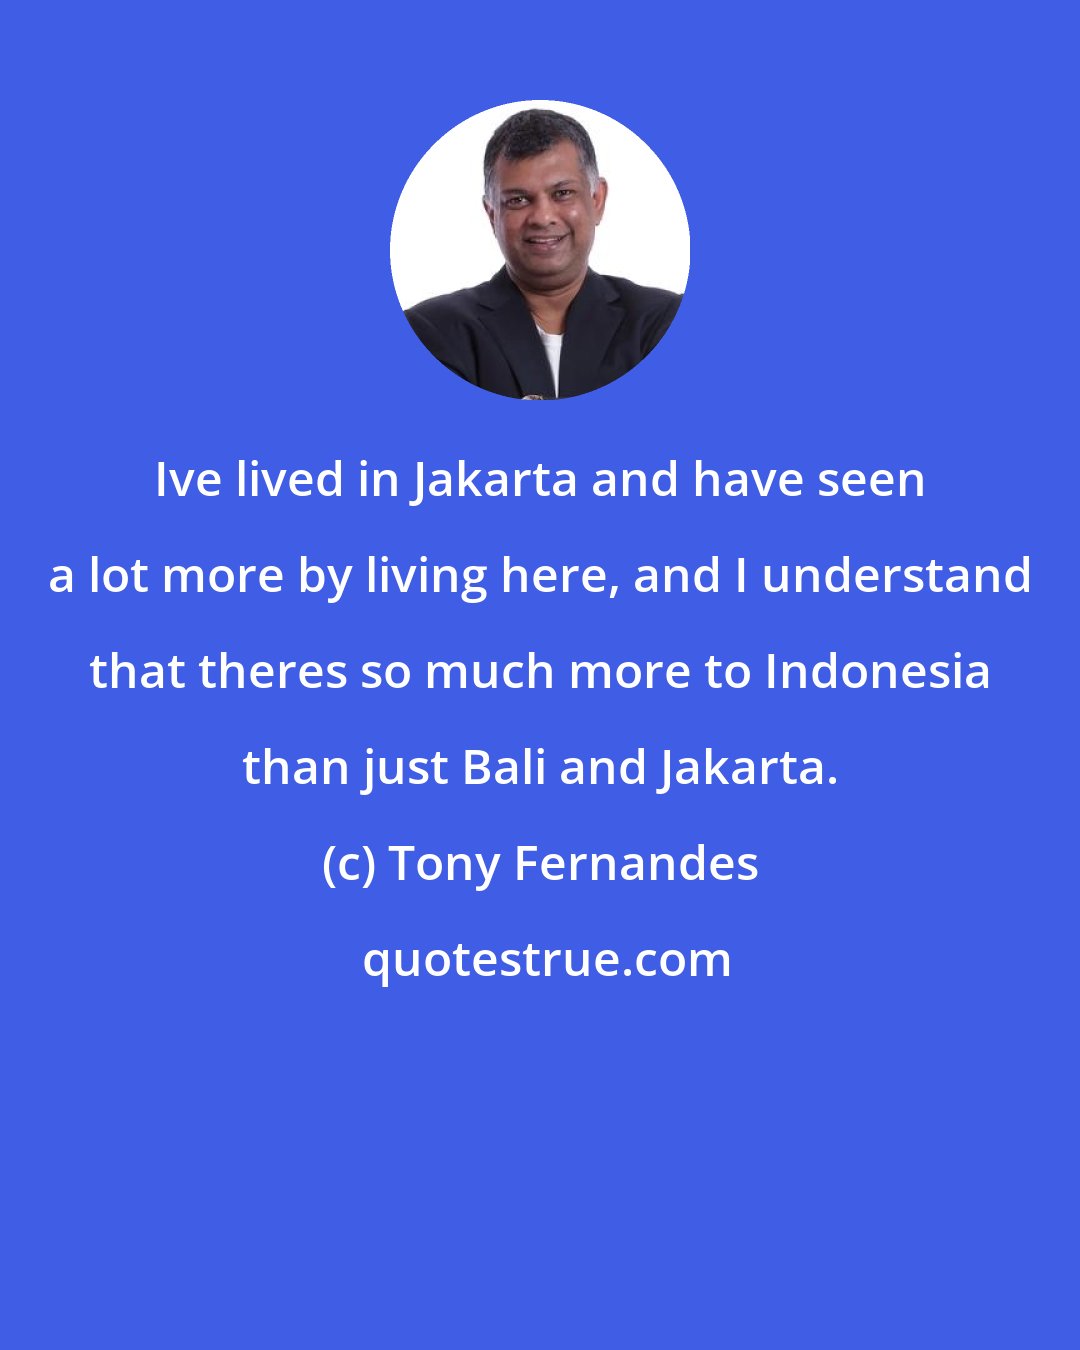 Tony Fernandes: Ive lived in Jakarta and have seen a lot more by living here, and I understand that theres so much more to Indonesia than just Bali and Jakarta.